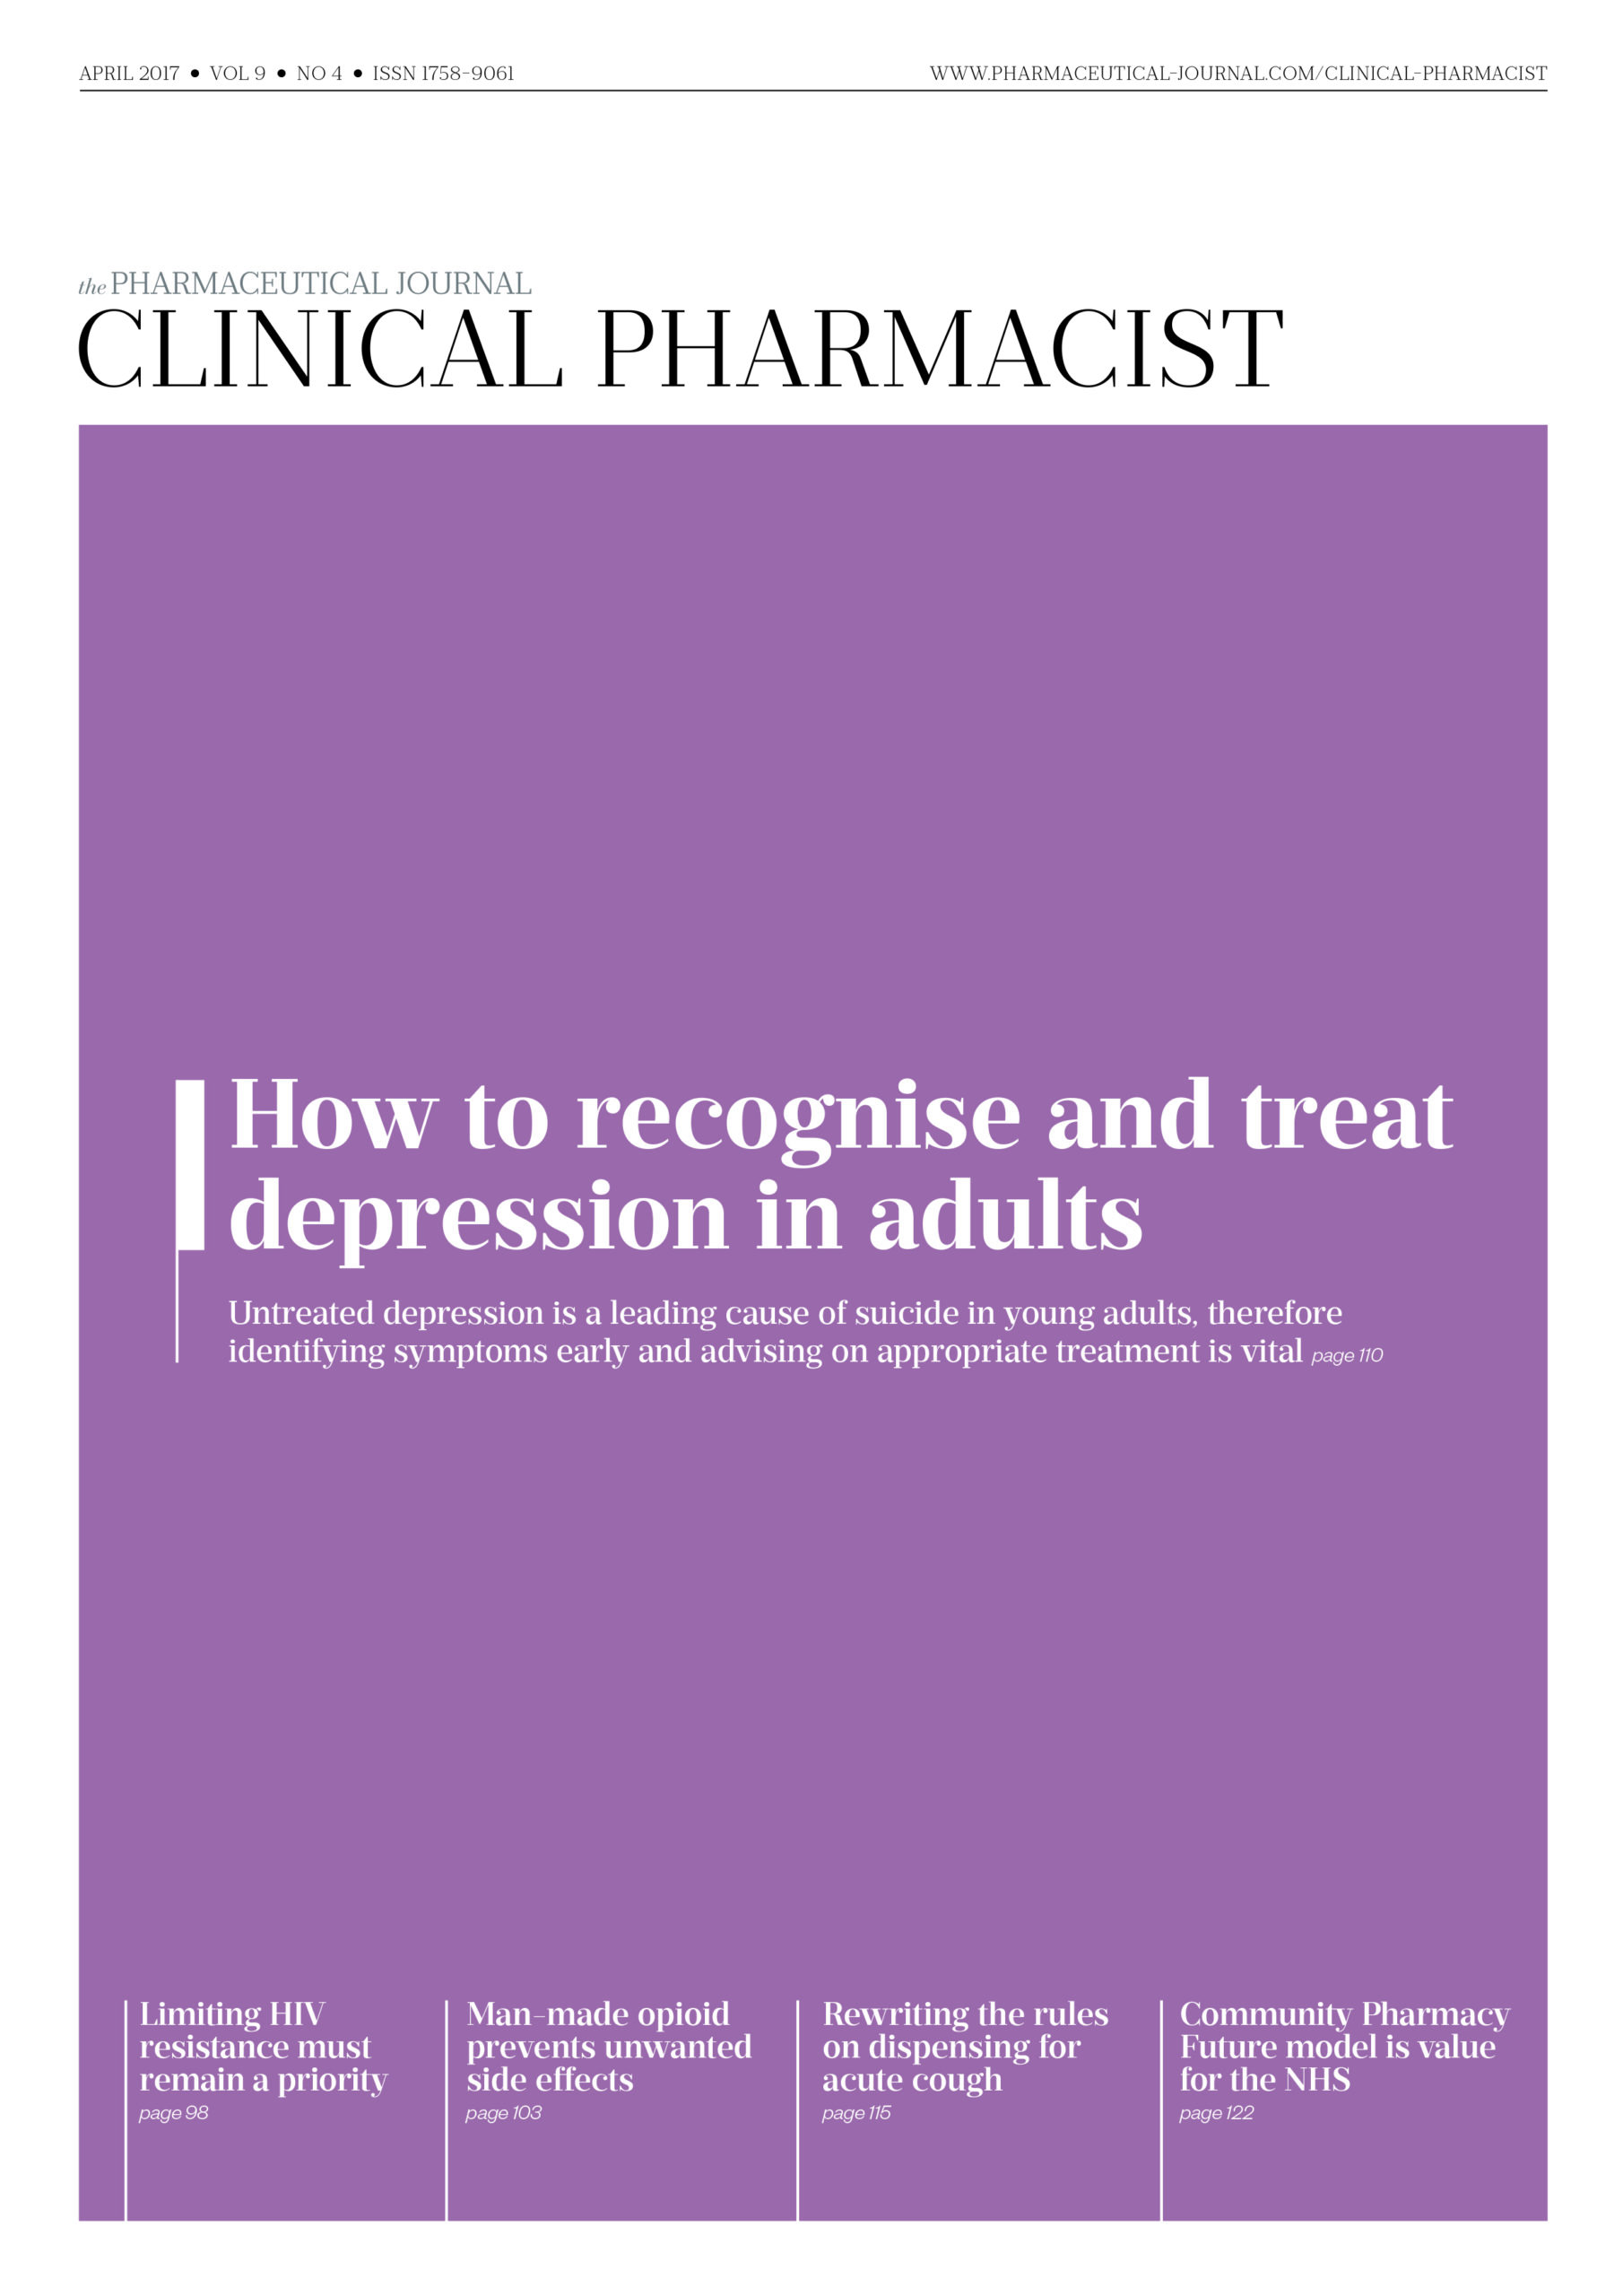 Publication issue cover for CP, April 2017, Vol 9, No 4